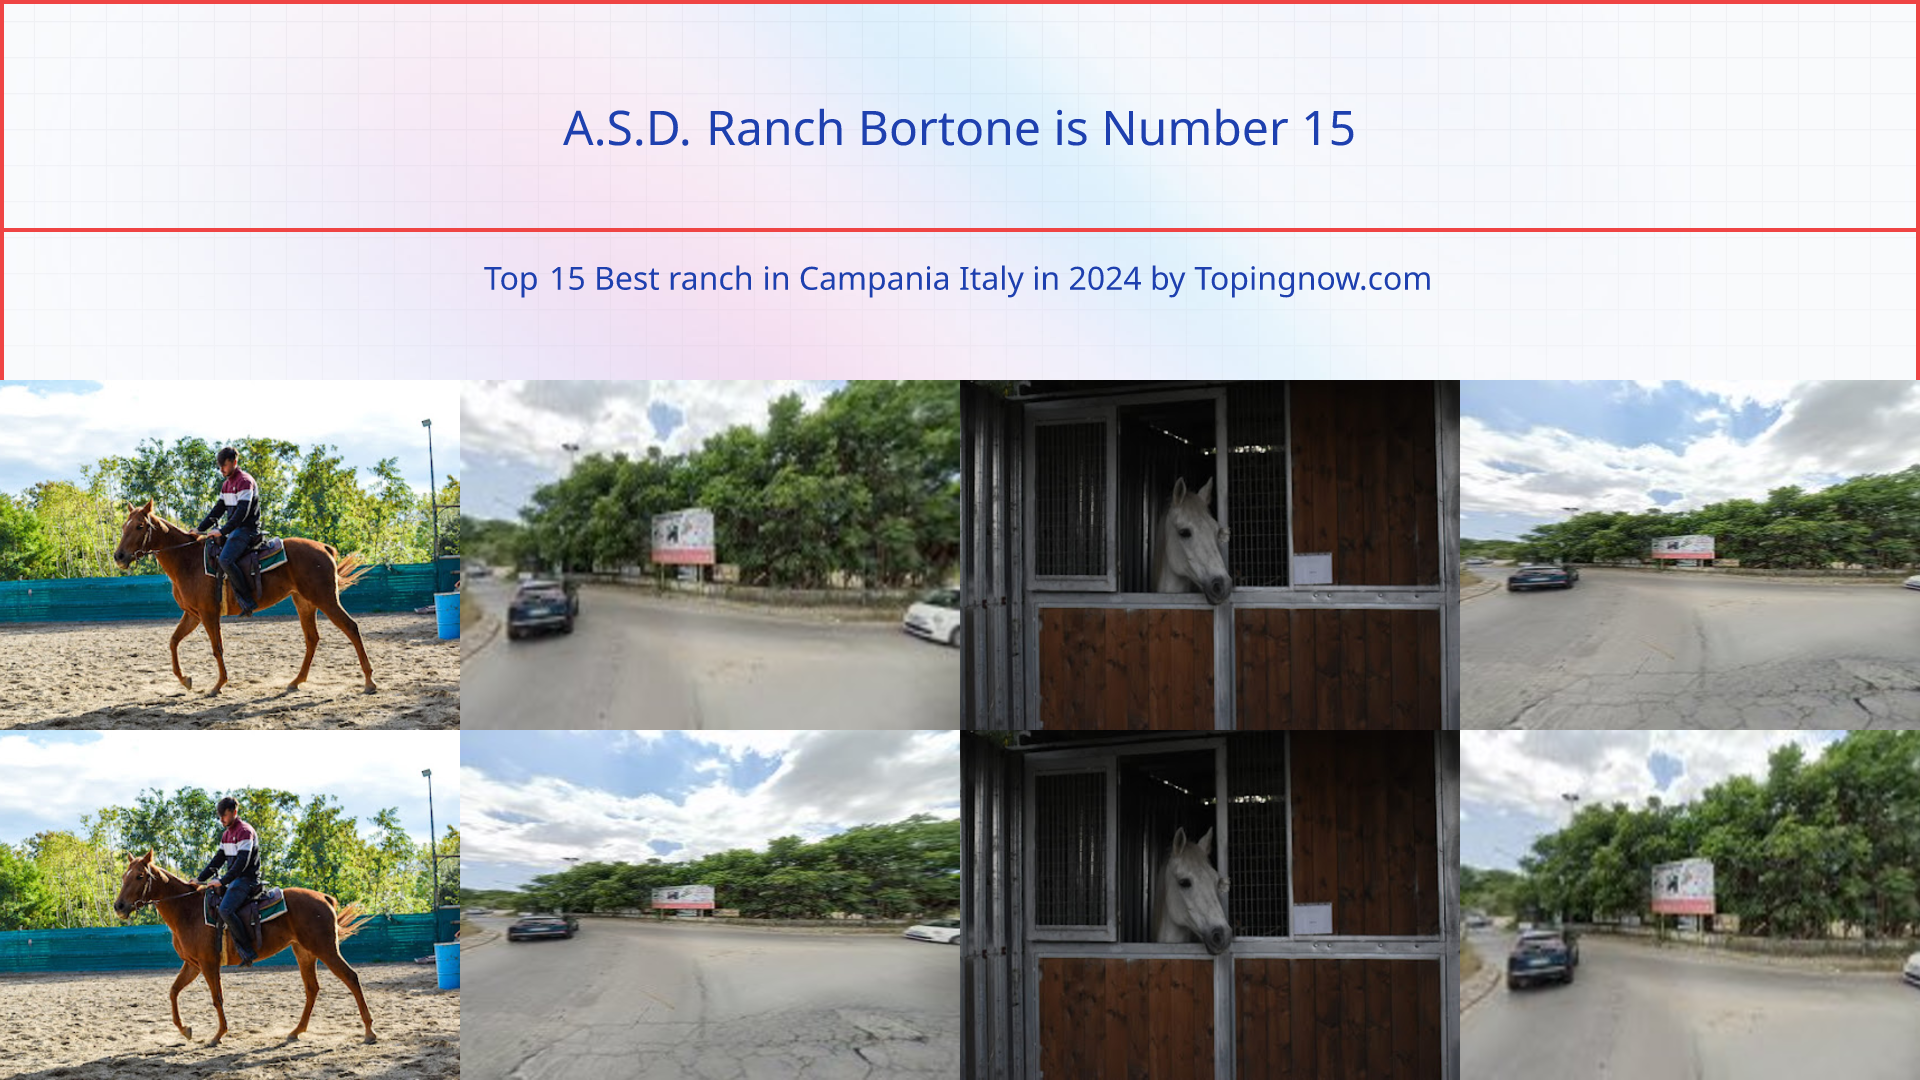 A.S.D. Ranch Bortone: Top 15 Best ranch in Campania Italy in 2024